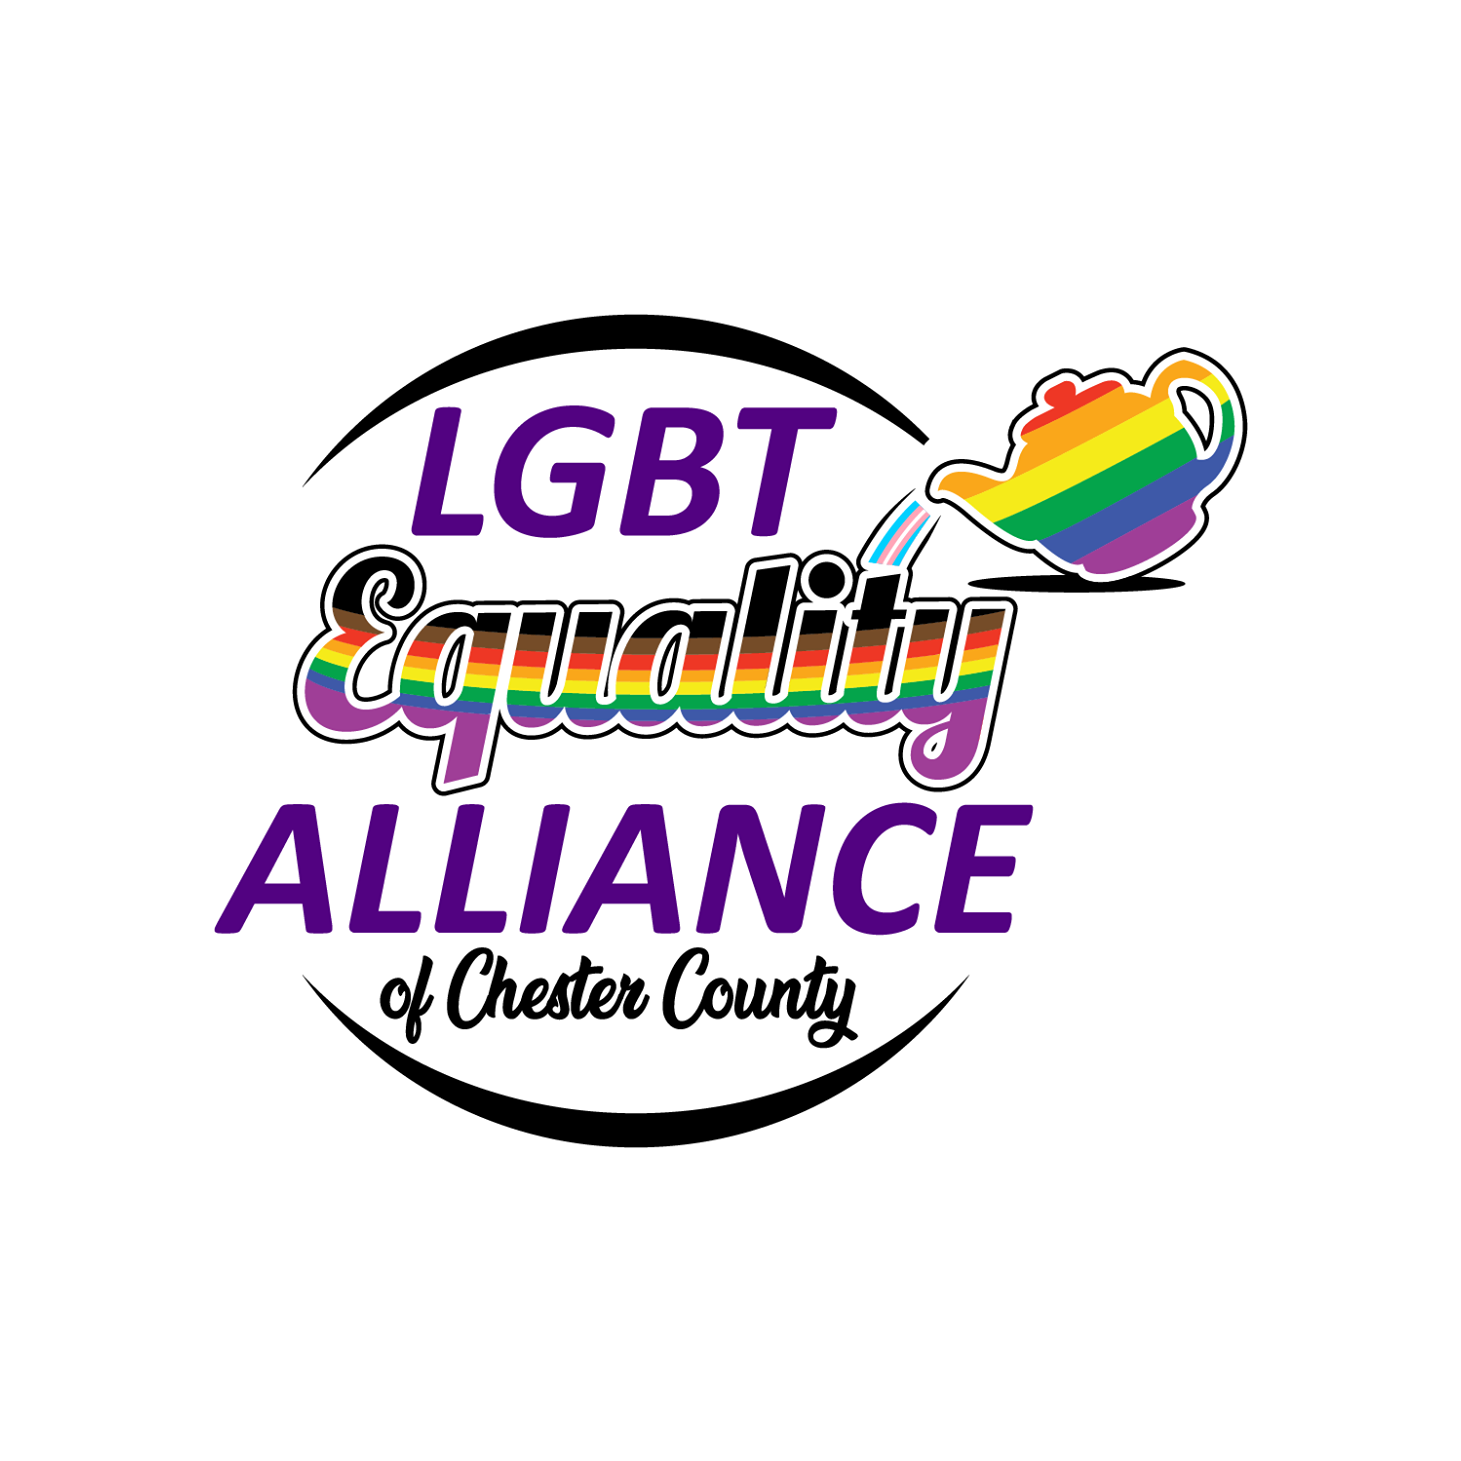 LGBTQ Human Rights Organization in Pennsylvania - LGBT Equality Alliance of Chester County